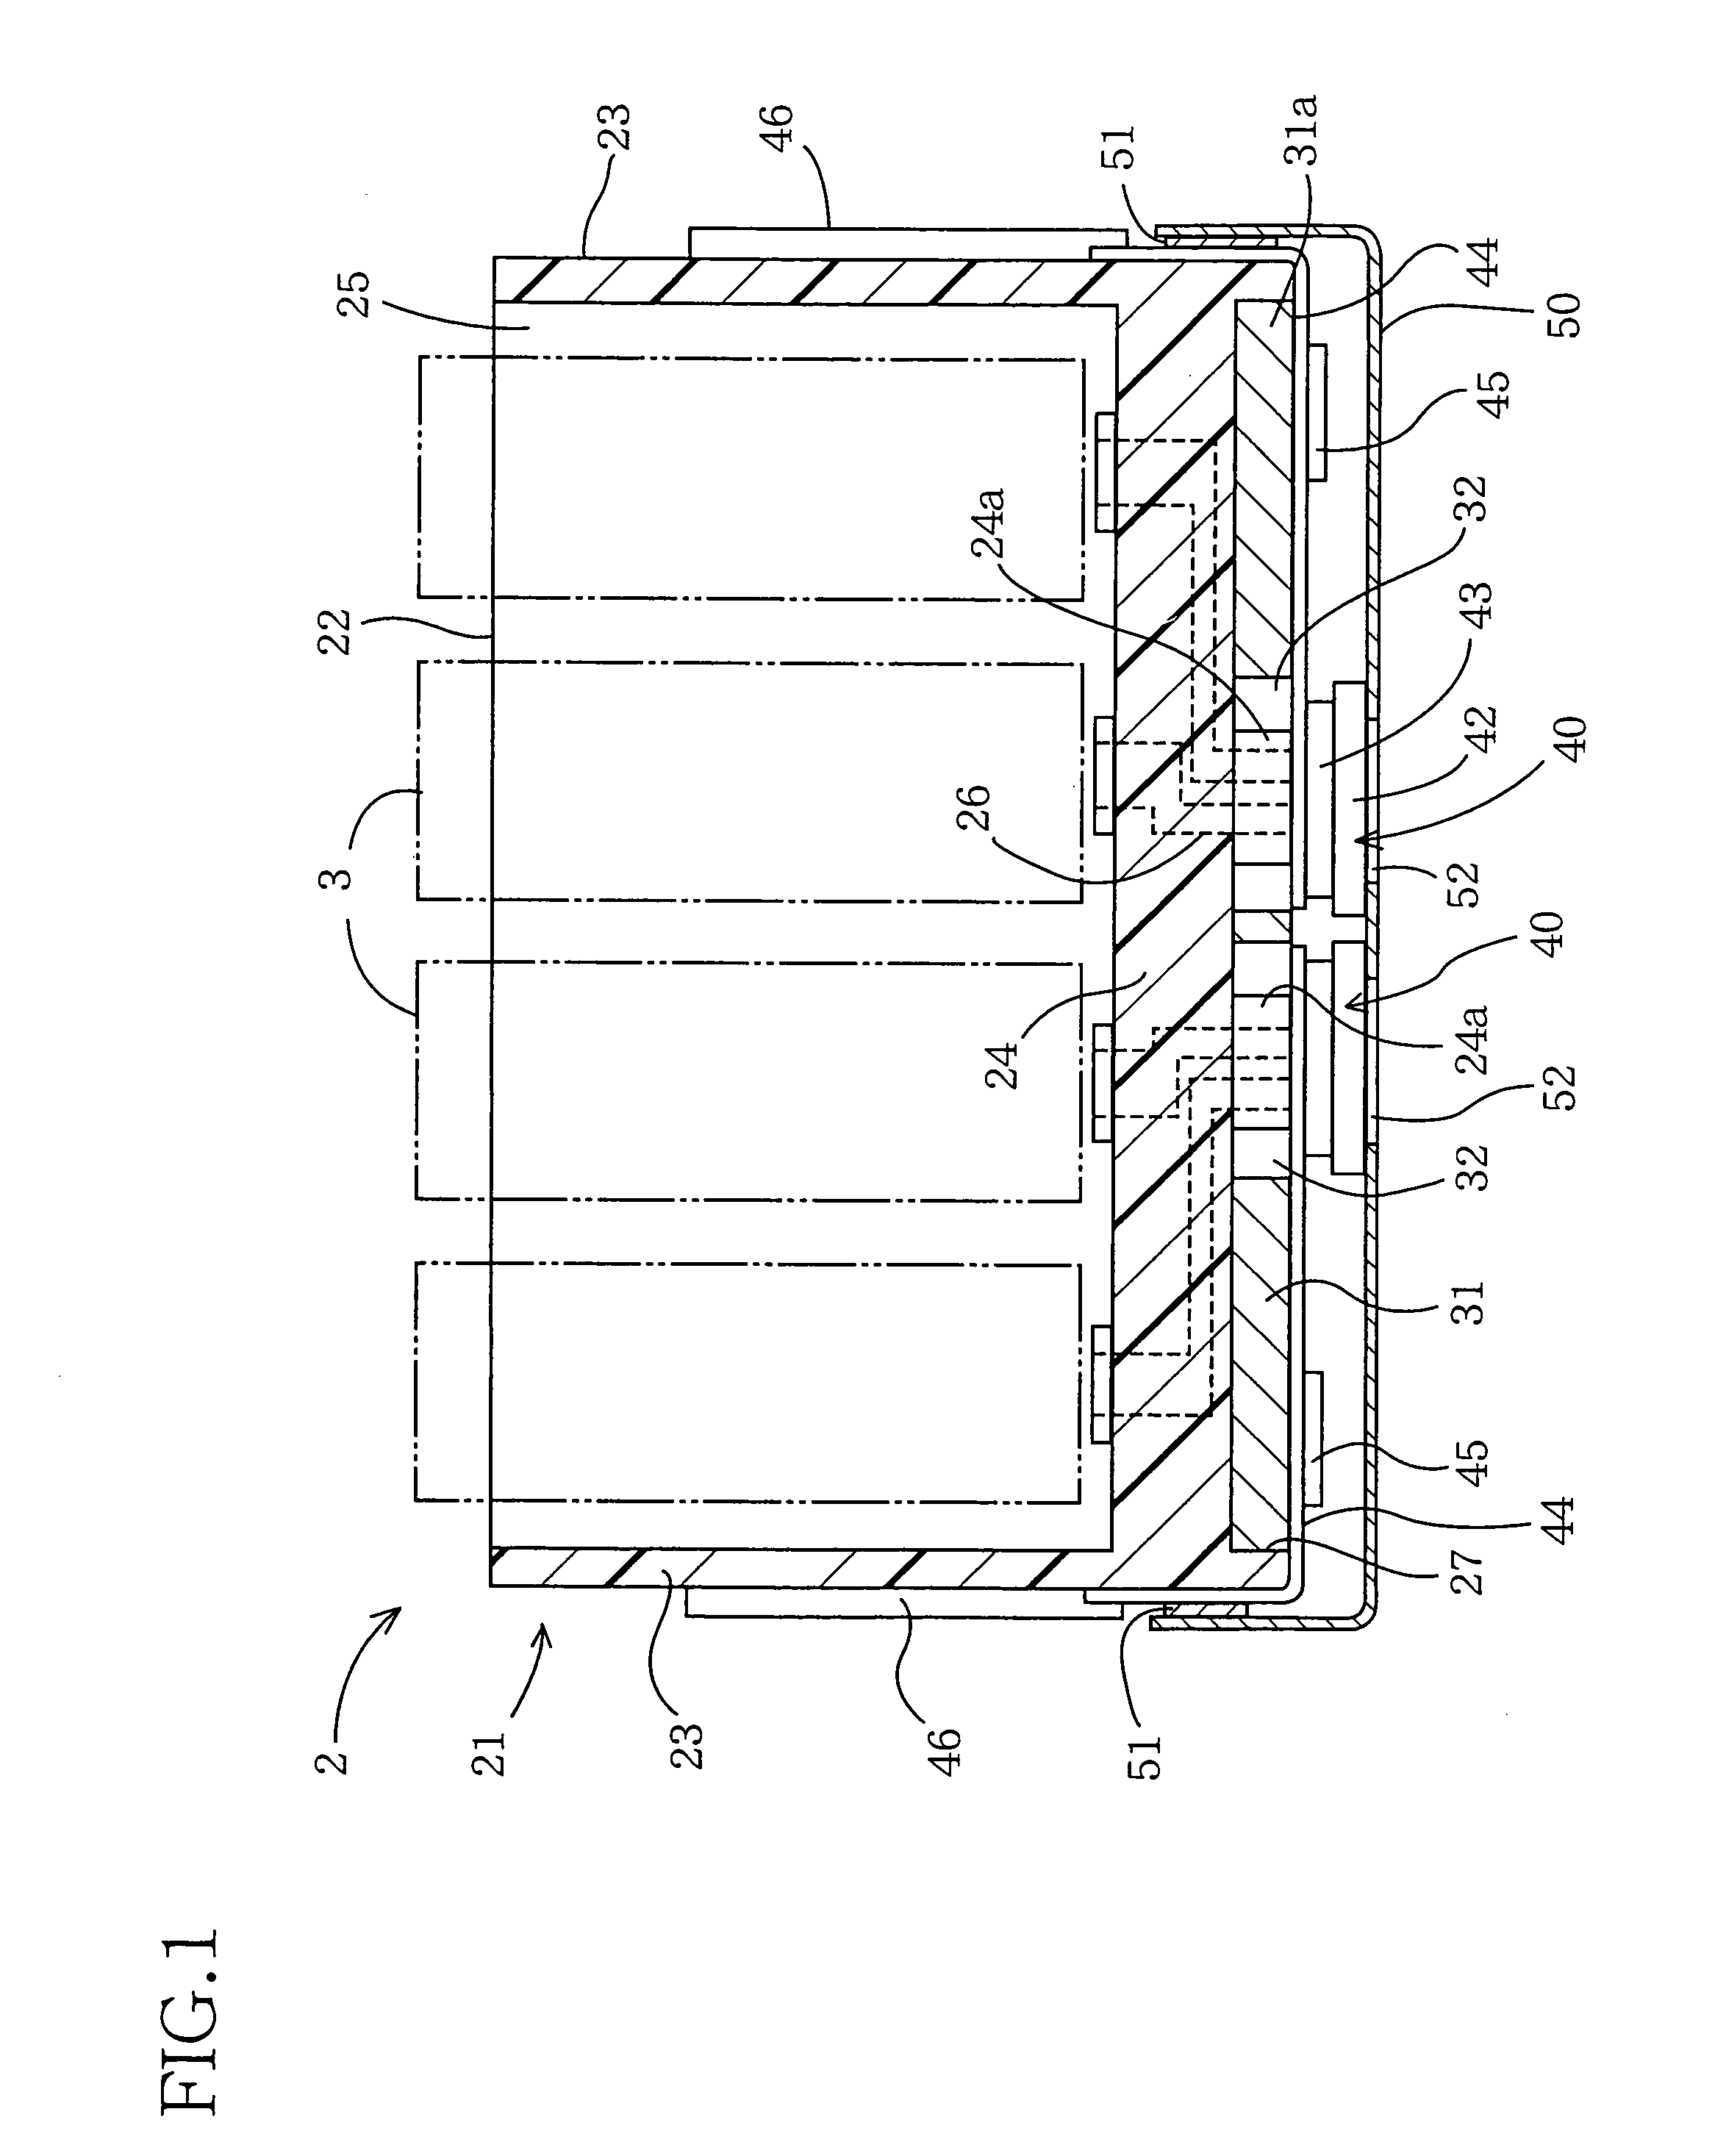 Recording apparatus equipped with heatsink